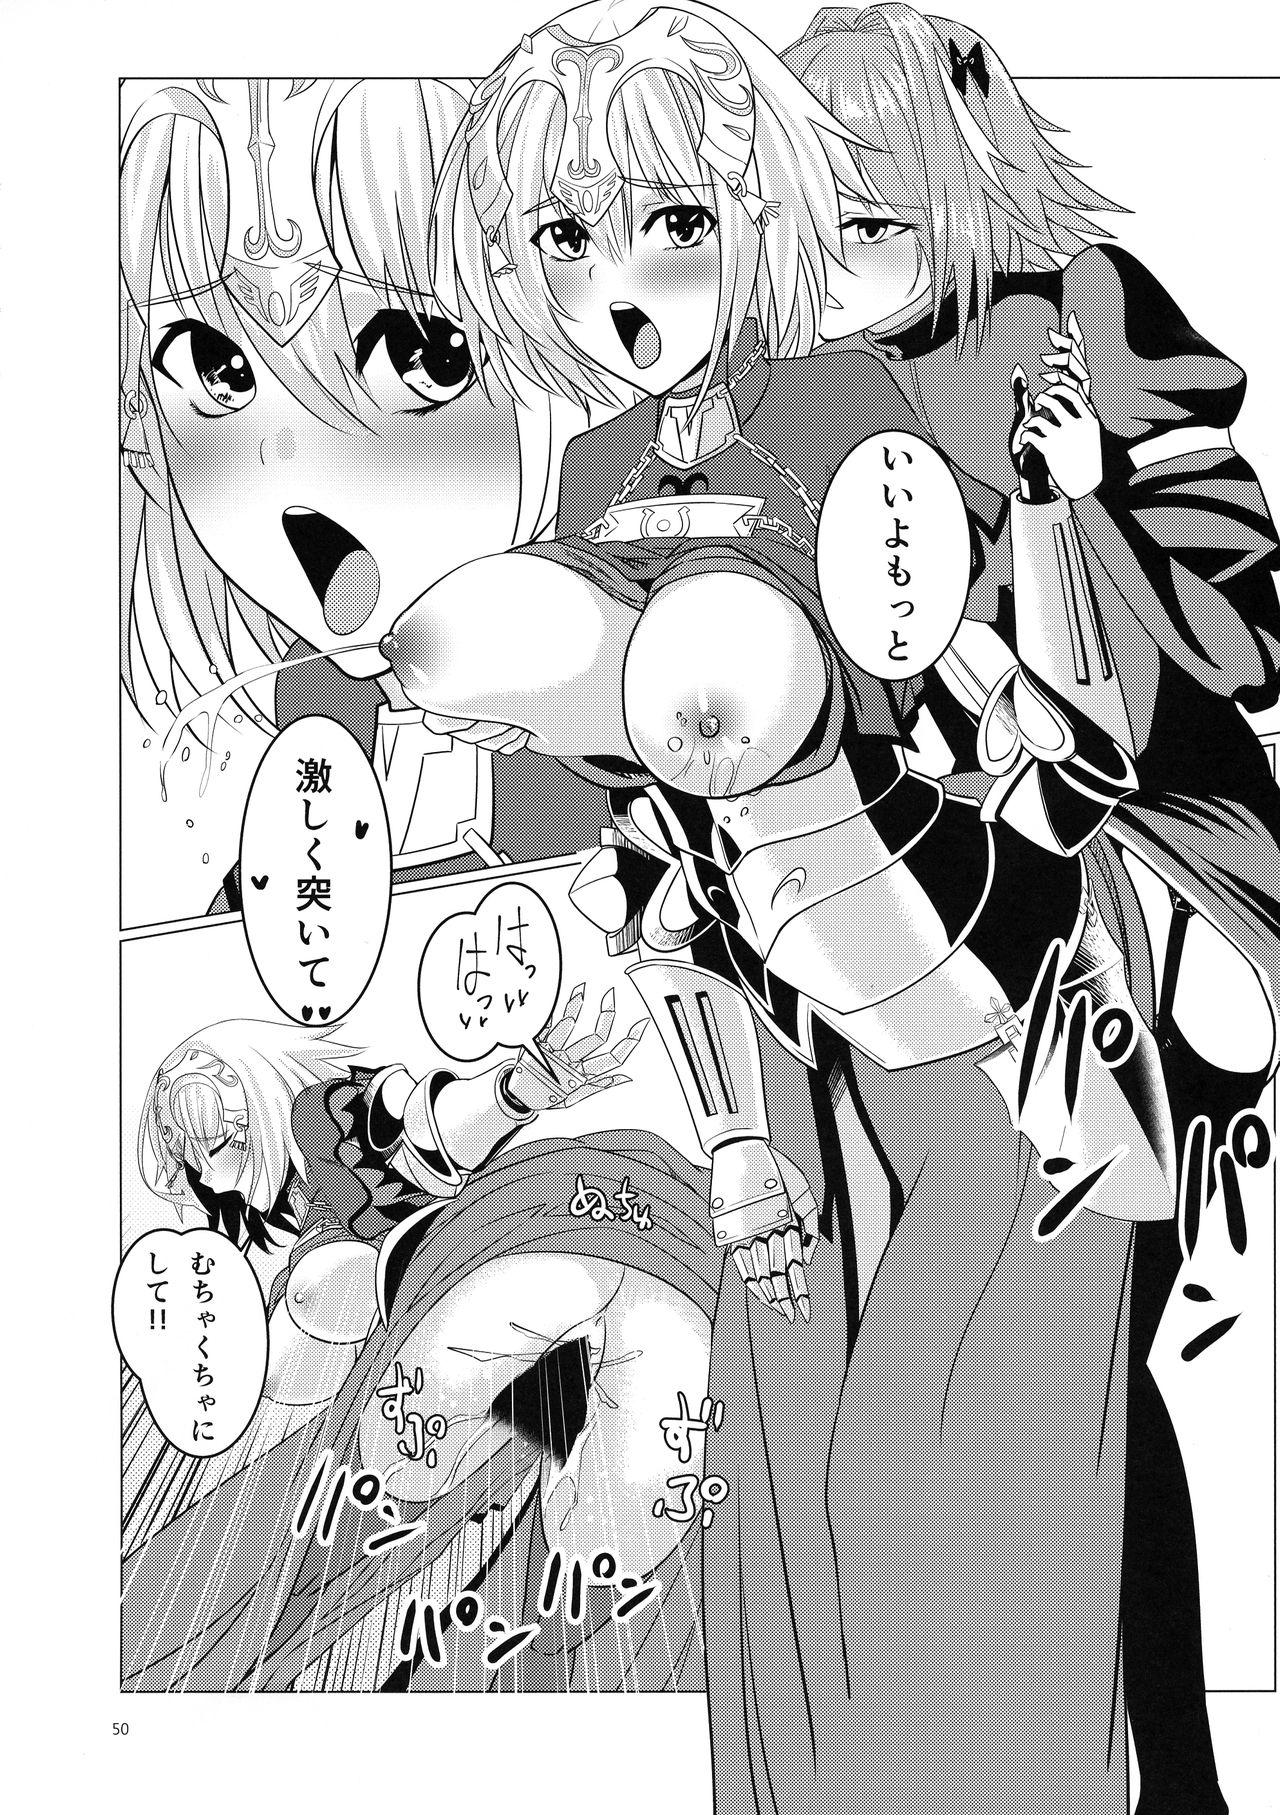 Matching Spirits - Jeanne and Astolfo have sex 46